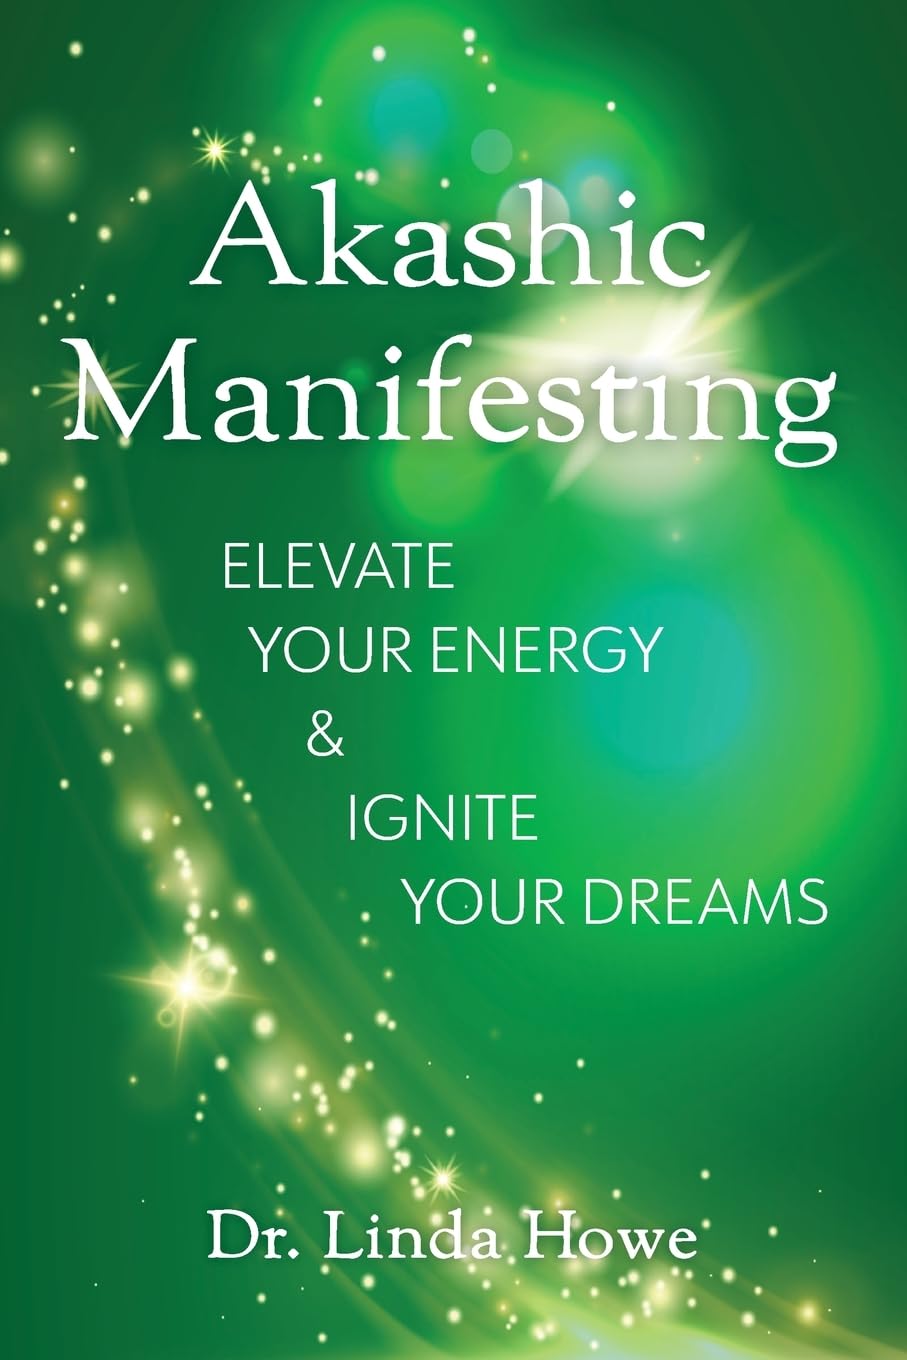 Akashic Records Practitioner Certification